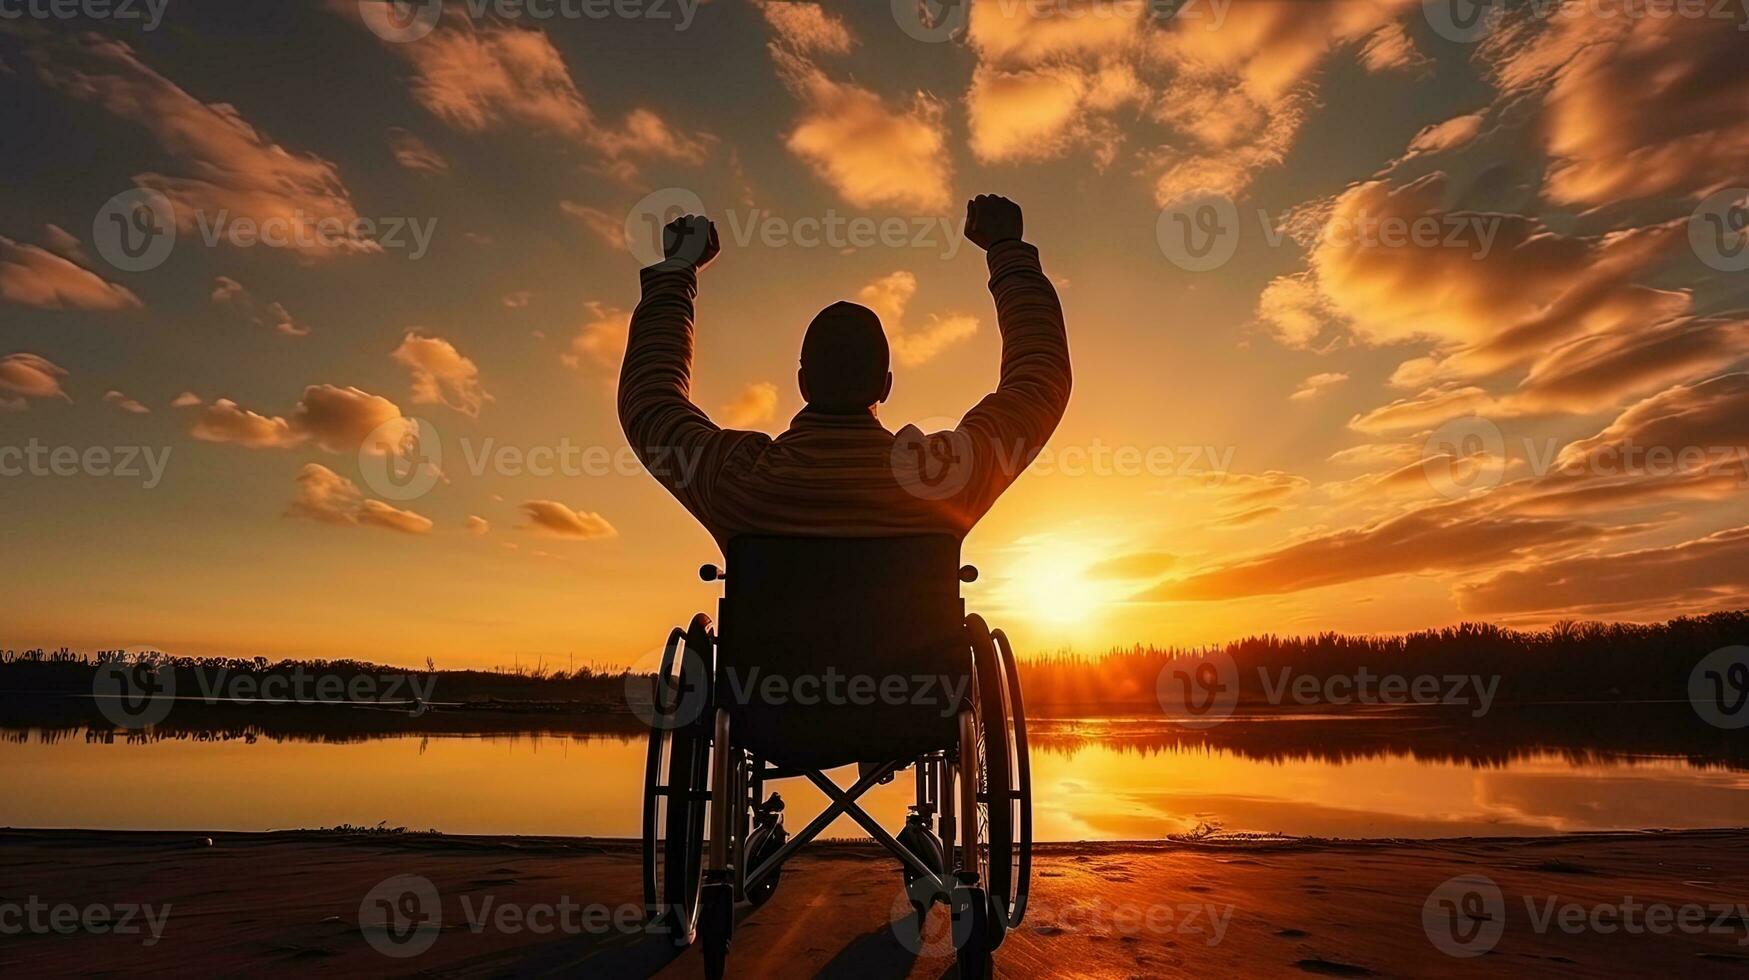 Man in a wheelchair with outstretched hands at sunset seen from behind. silhouette concept photo